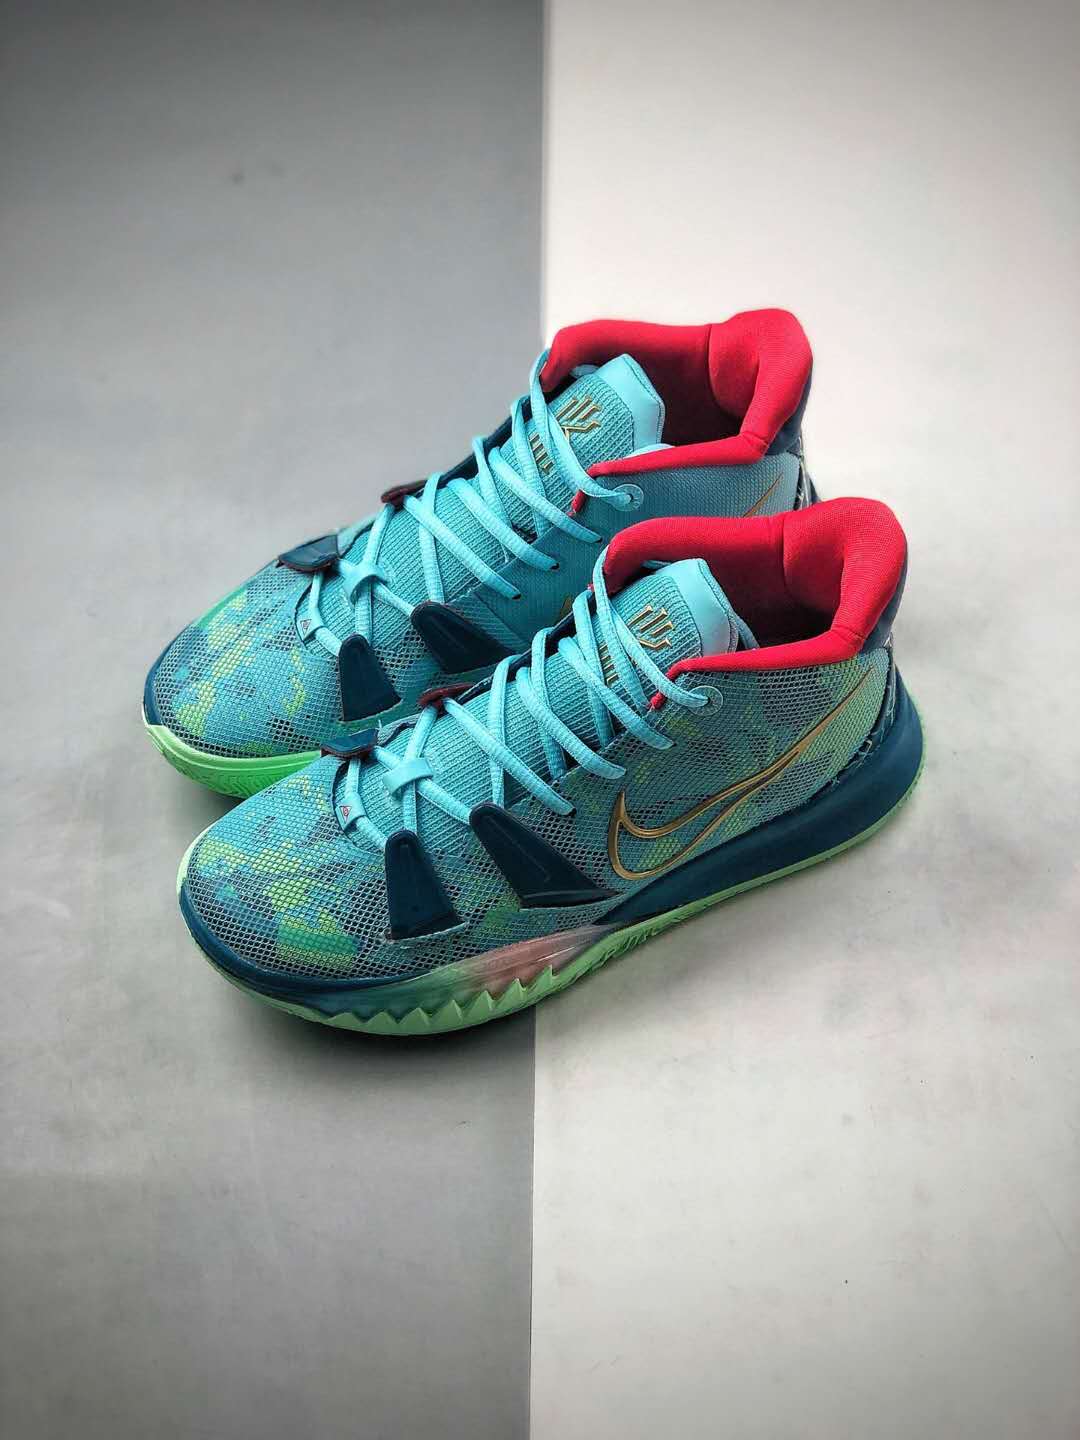 Nike Kyrie 7 Preheat 'Special FX' DC0588-400: Unleash Your Basketball Superpowers!